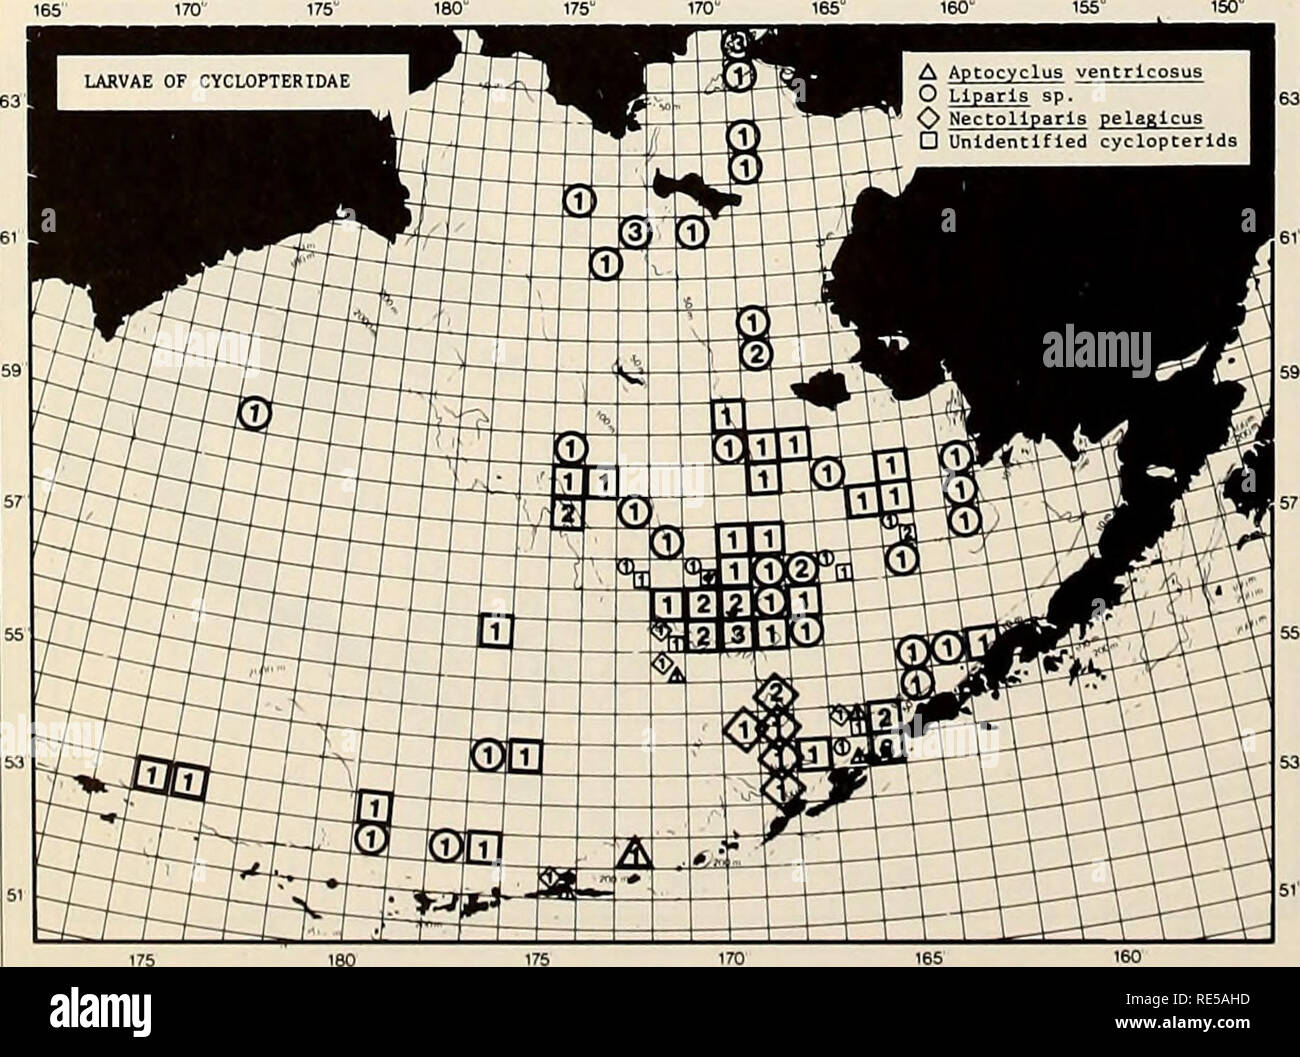 . The Eastern Bering Sea Shelf : oceanography and resources / edited by Donald W. Hood and John A. Calder. Oceanography Bering Sea.. 484 Fisheries oceanography summer. They were distributed from the Aleutian Islands north to 58° N, and from 161° W in Bristol Bay to 174°W along the Aleutian Islands and along the continental slope. Eggs of agonids are demersal and none were reported. Cyclopteridae The snailfish and lumpsuckers, with 49 species, are the second largest family (after Cottidae) in the Bering Sea and one of the least known with respect to both adult and larval identification. Cyclopt Stock Photo